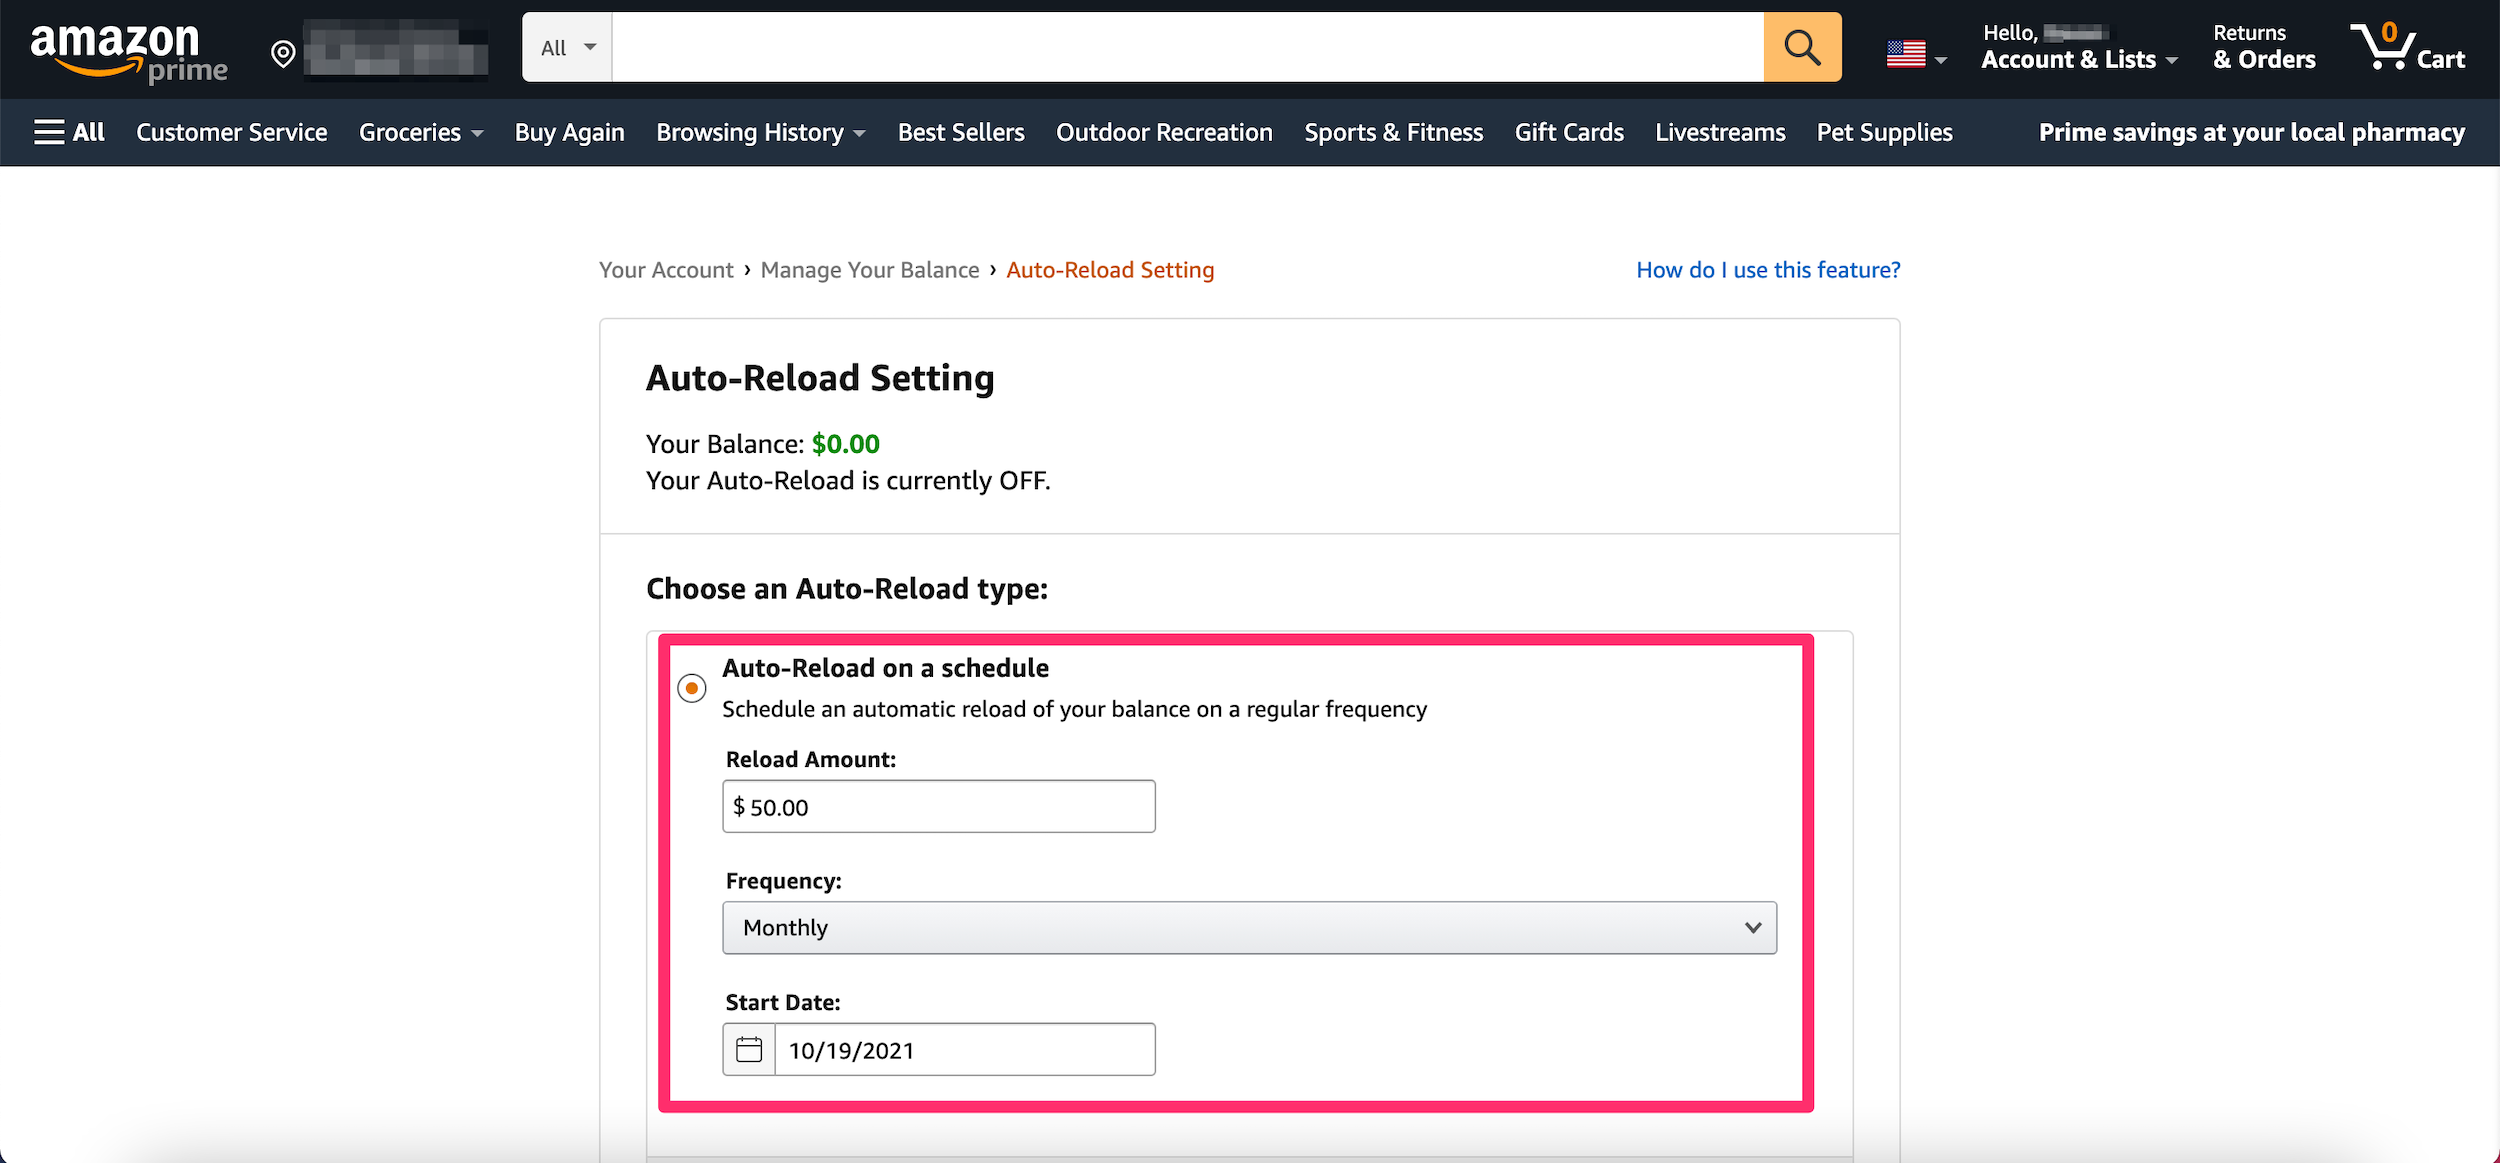 Screenshot showing the auto-reload gift card sign-up page for an Amazon account